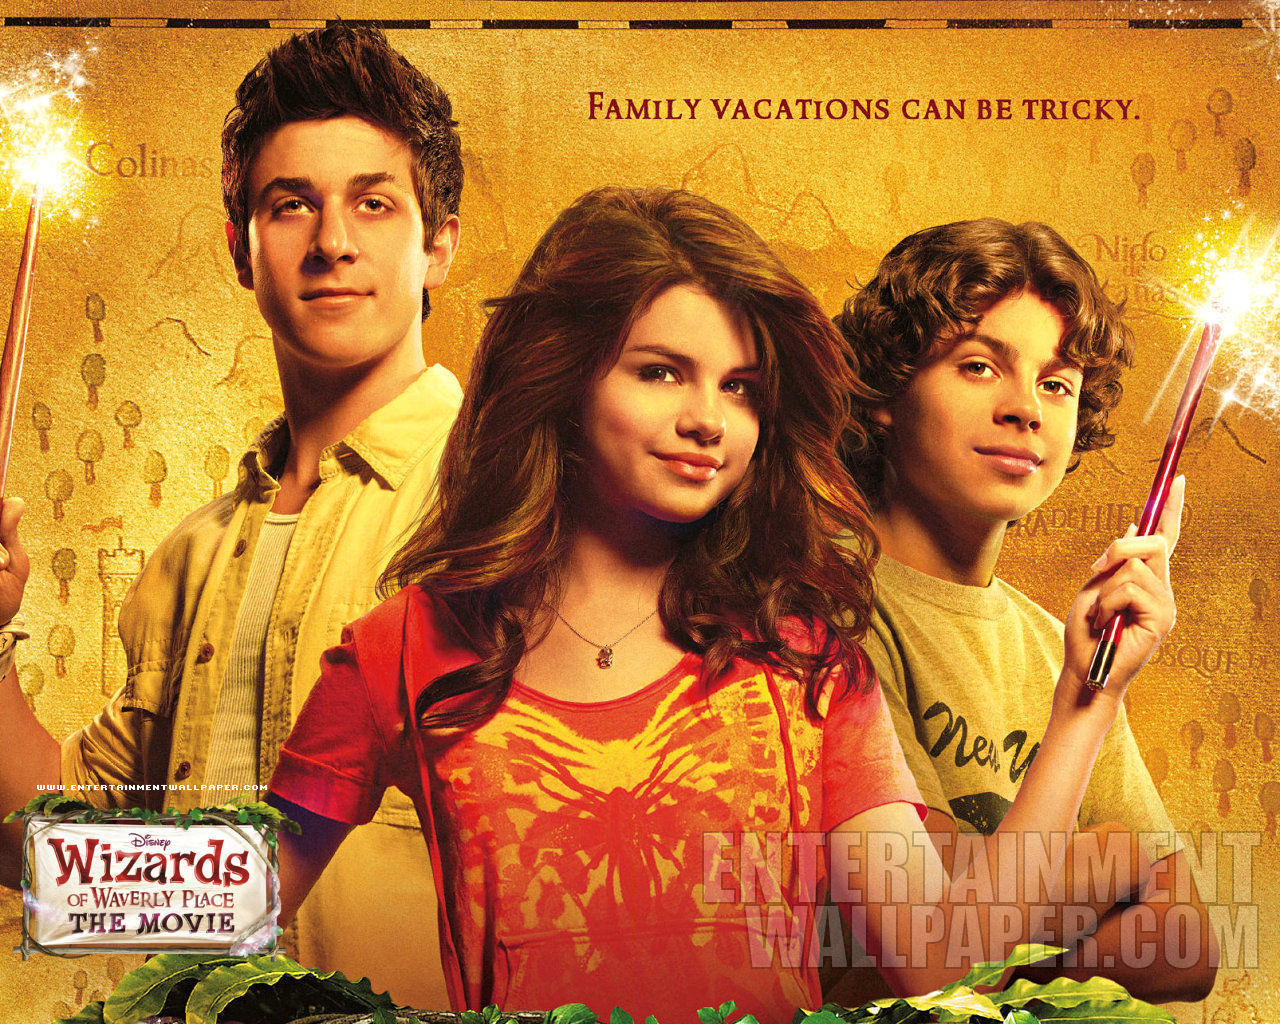 Wizards The Movie Of Waverly Place